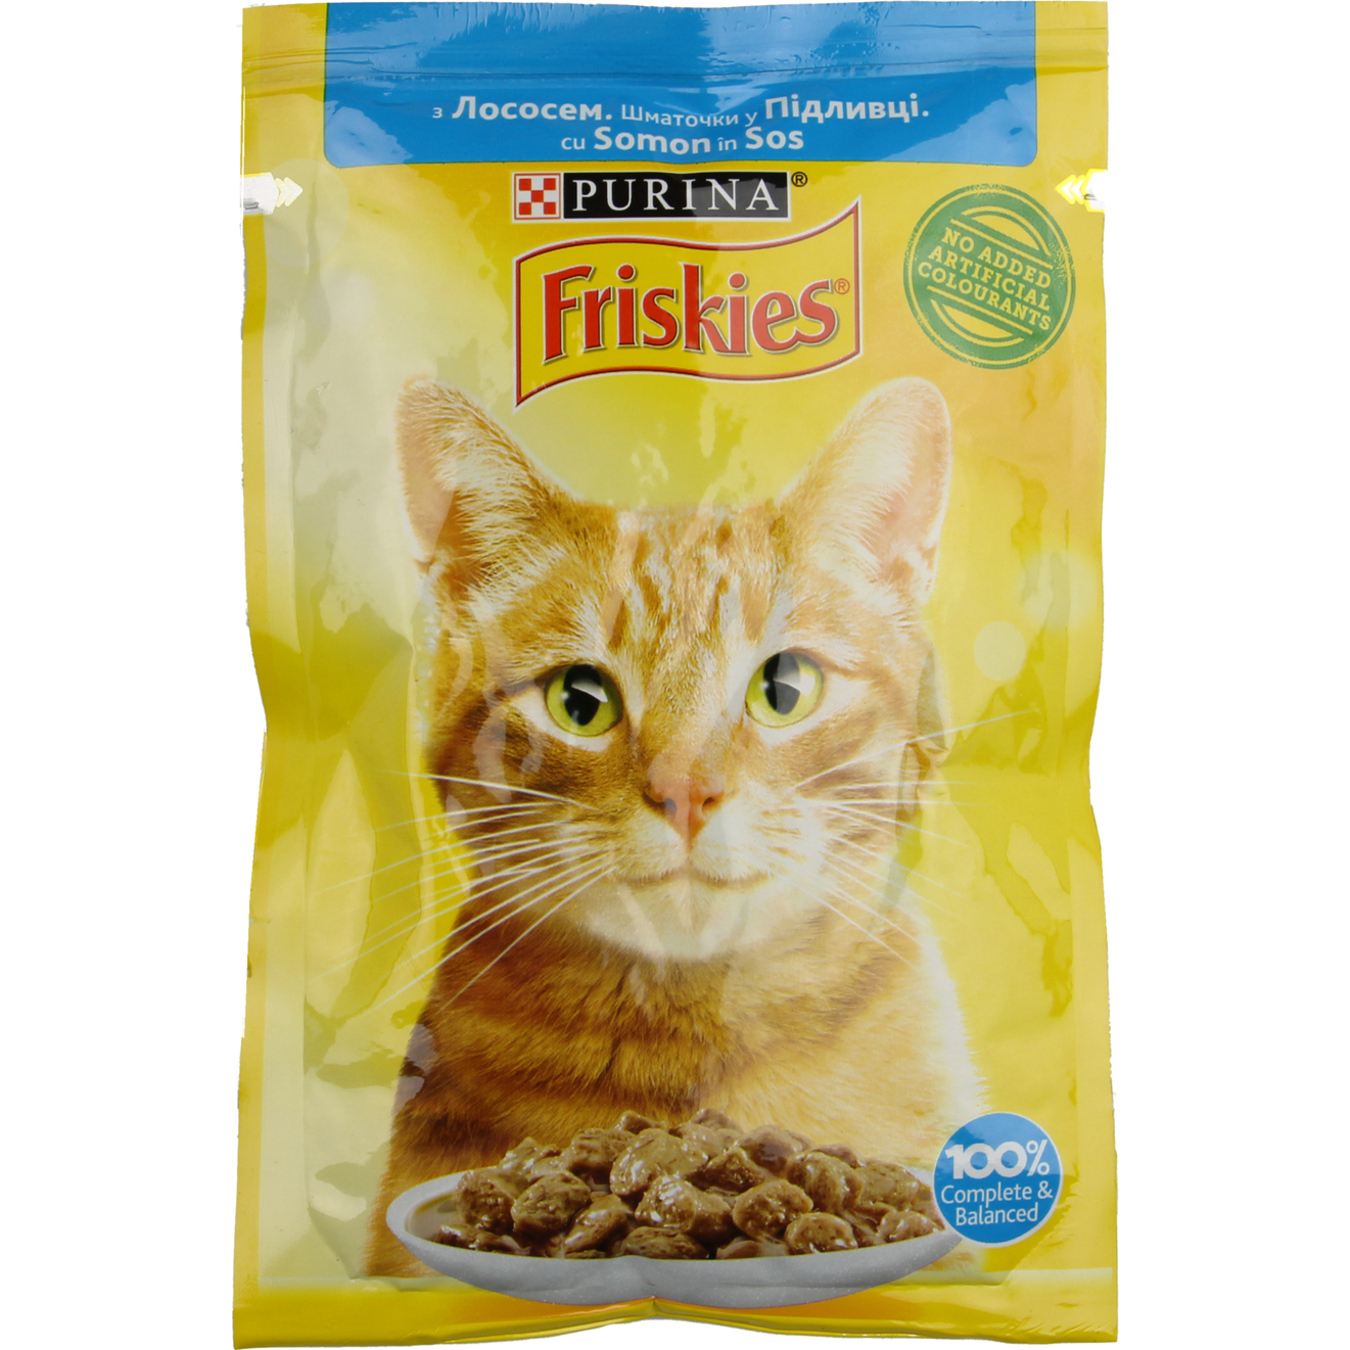 Purina Friskies with salmon pieces in sauce for cats food 85g